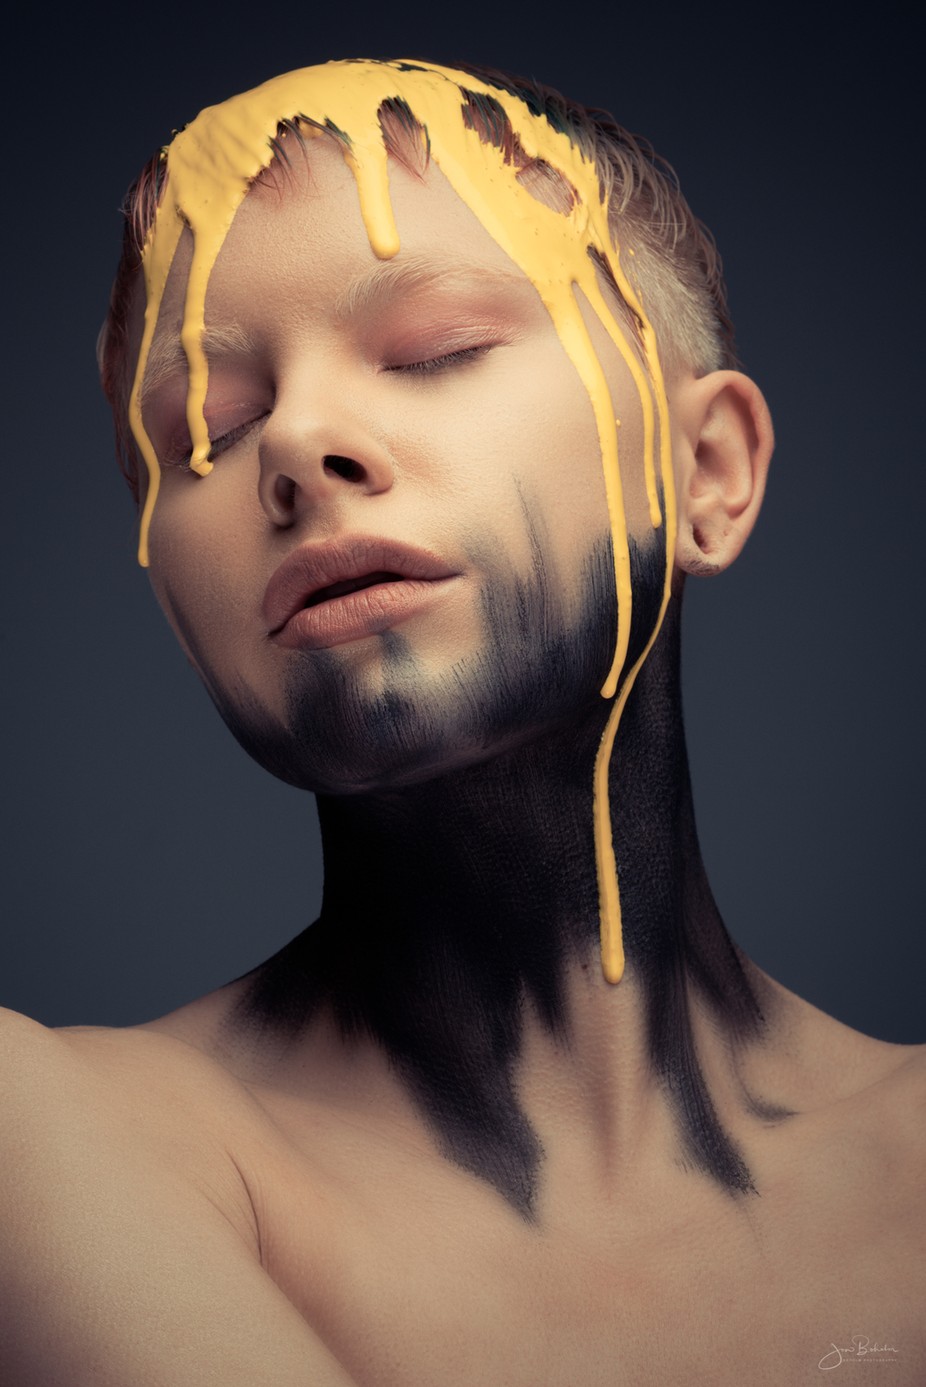 Black And Yellow by Boholm - Inspiring Portraits Photo Contest get inspired magazine